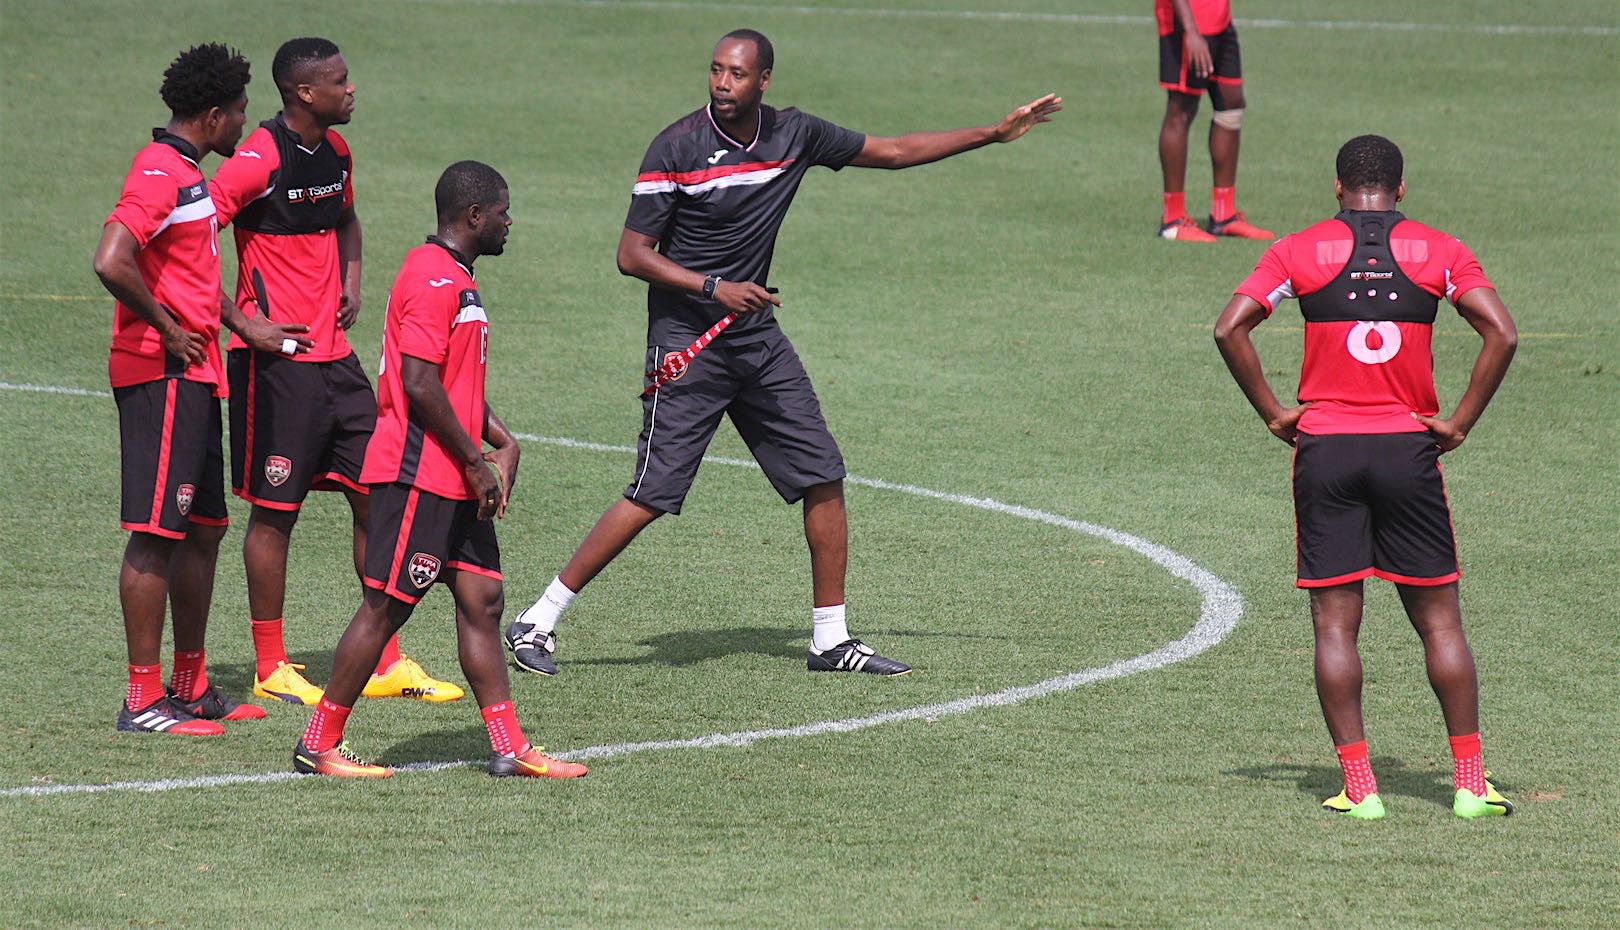 T&T Regroups and Refocuses for Panama.